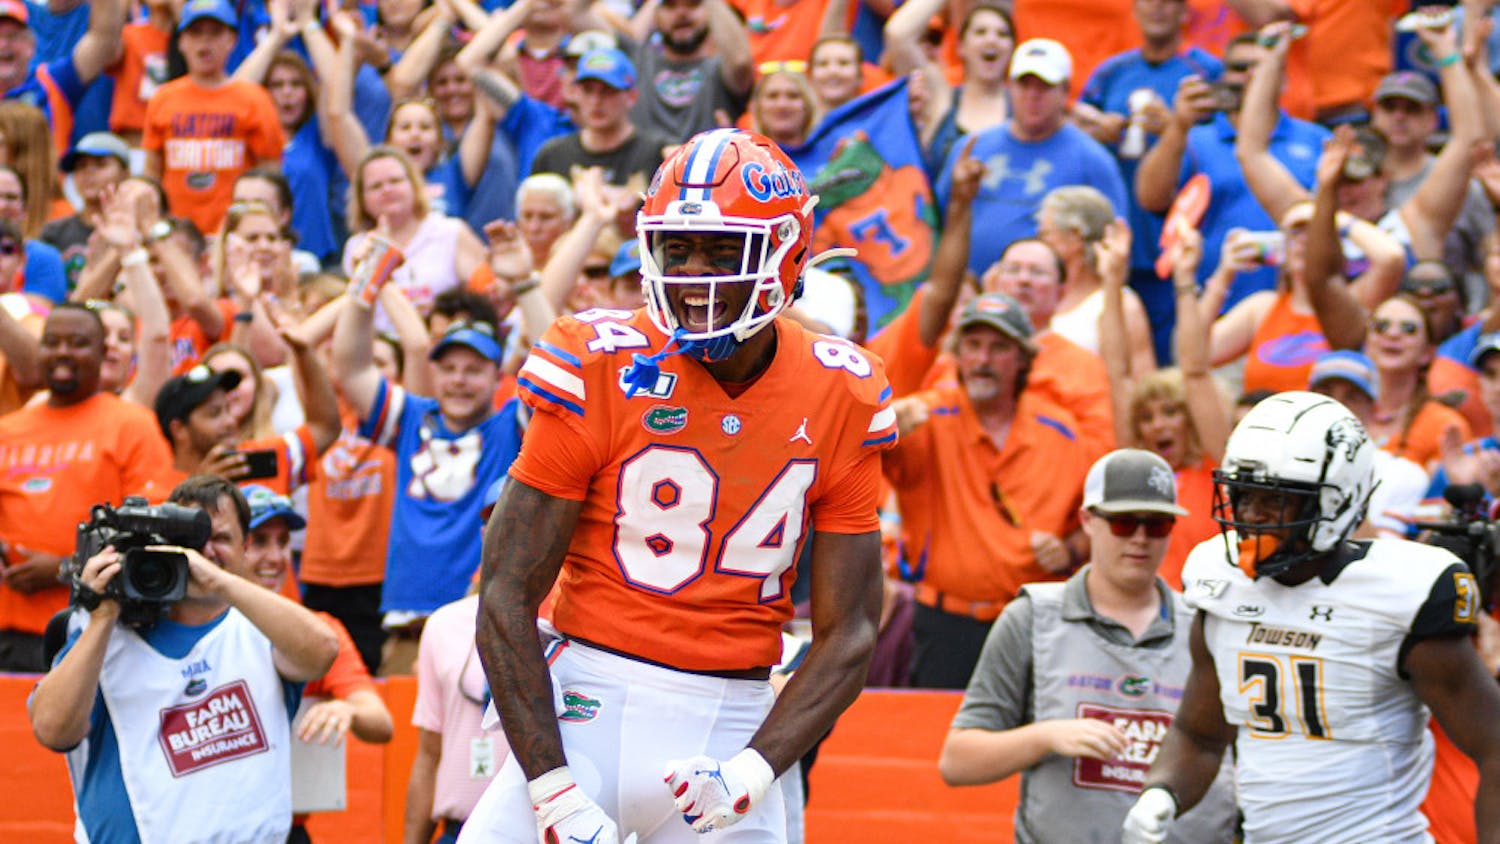 Tight end Kyle Pitts caught two touchdowns as UF defeated Towson 38-0.